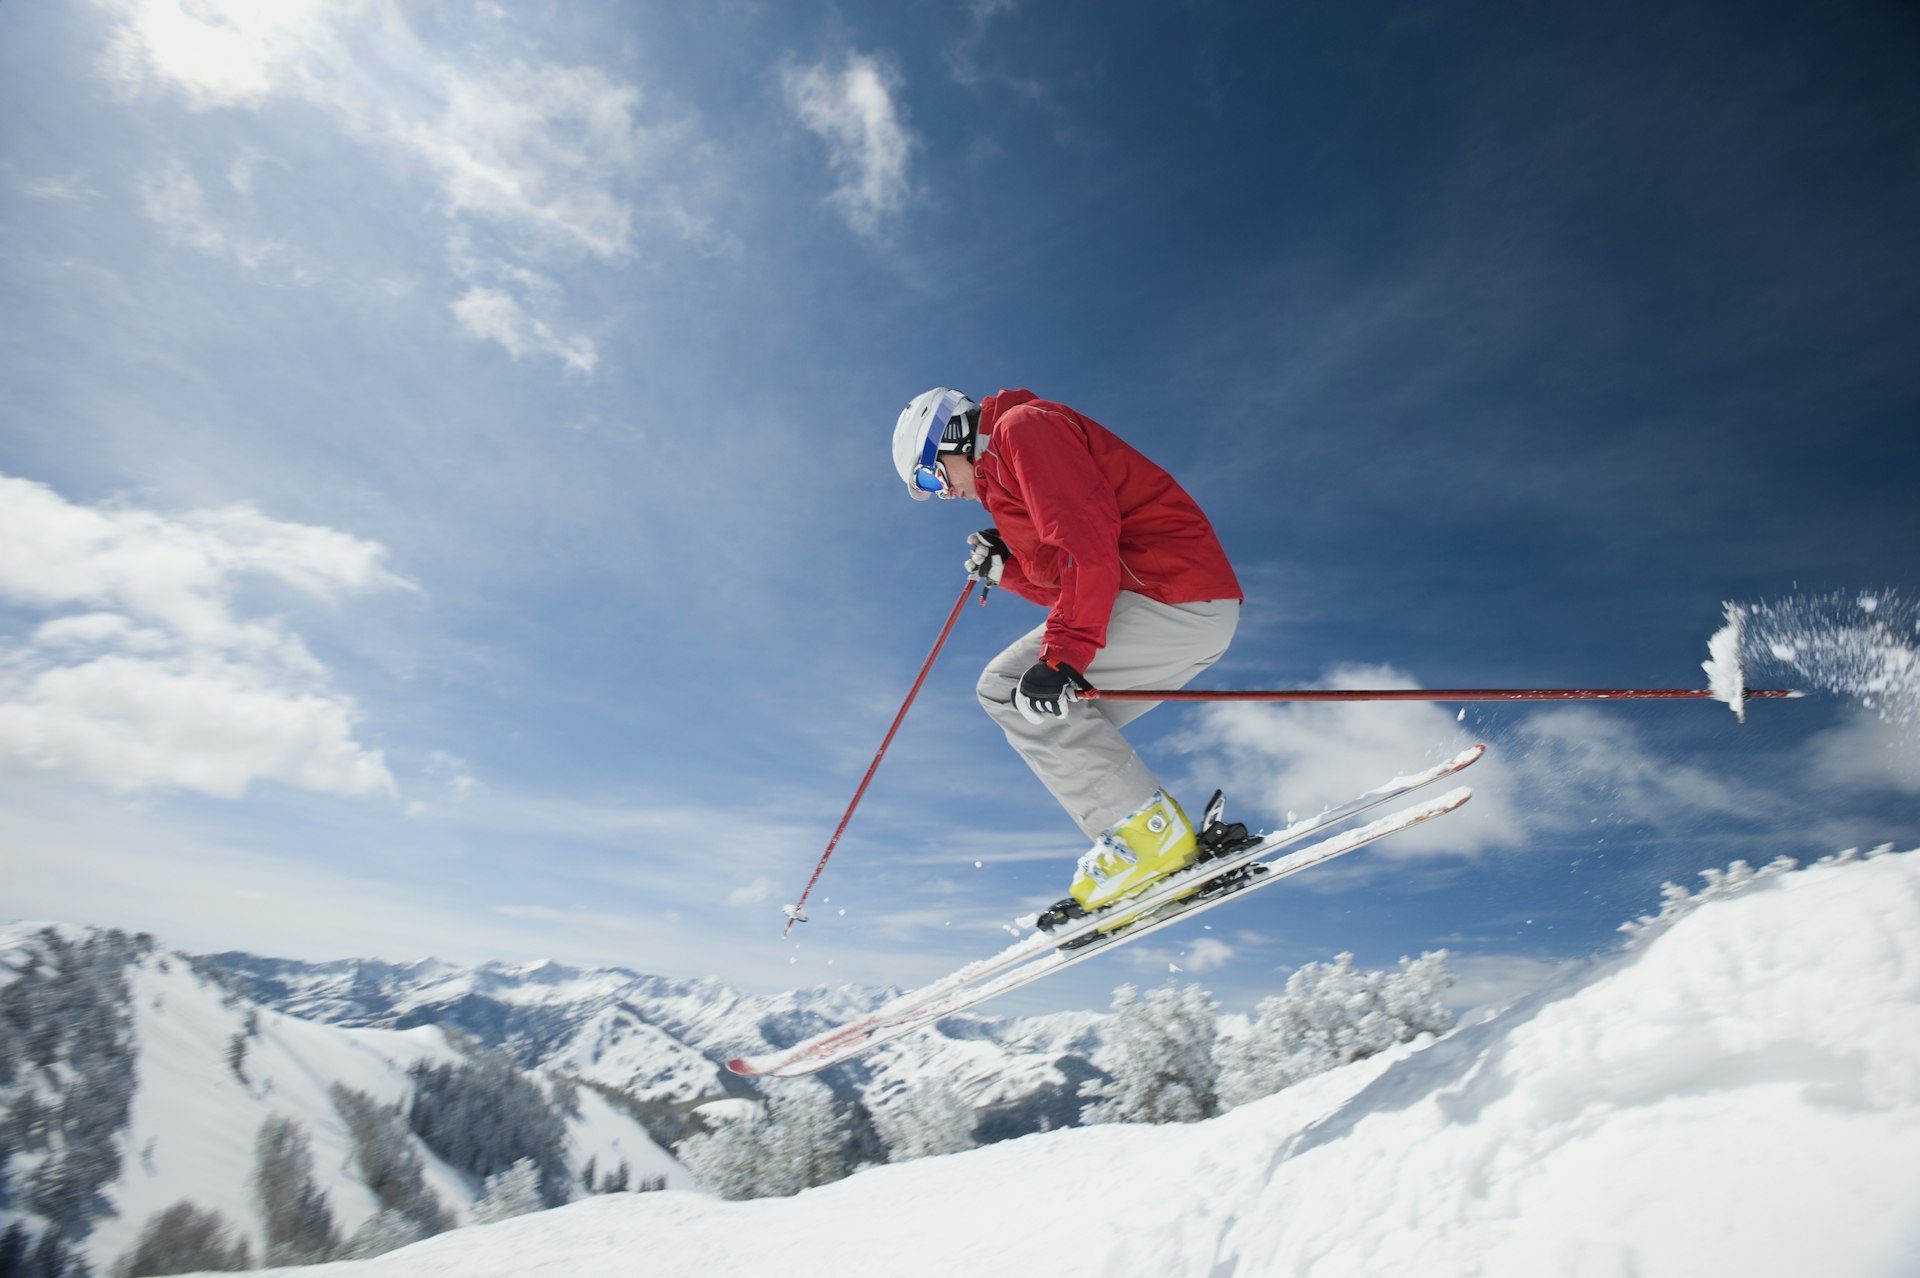 Man in air on skis in a snowy landscape